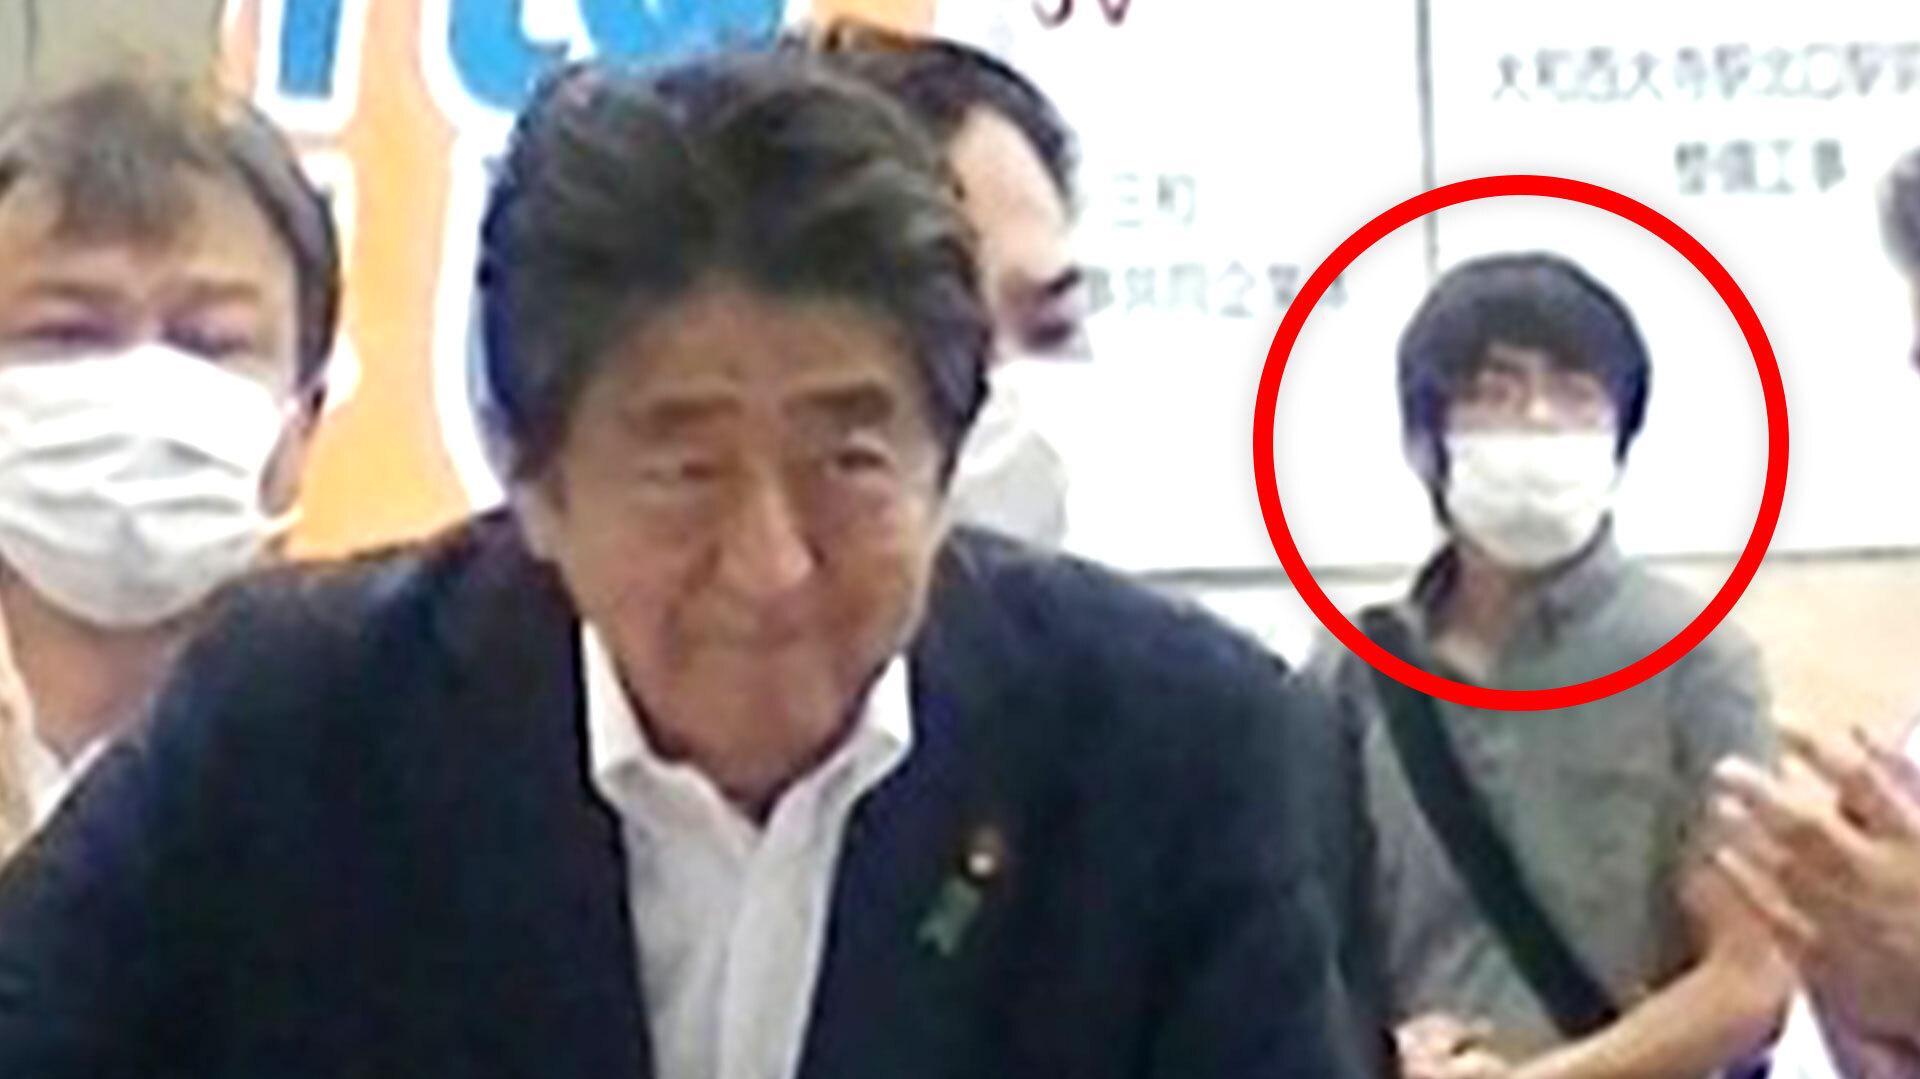 Chilling Final Pic Shows Shinzo Abe S Killer Lurking Behind Him